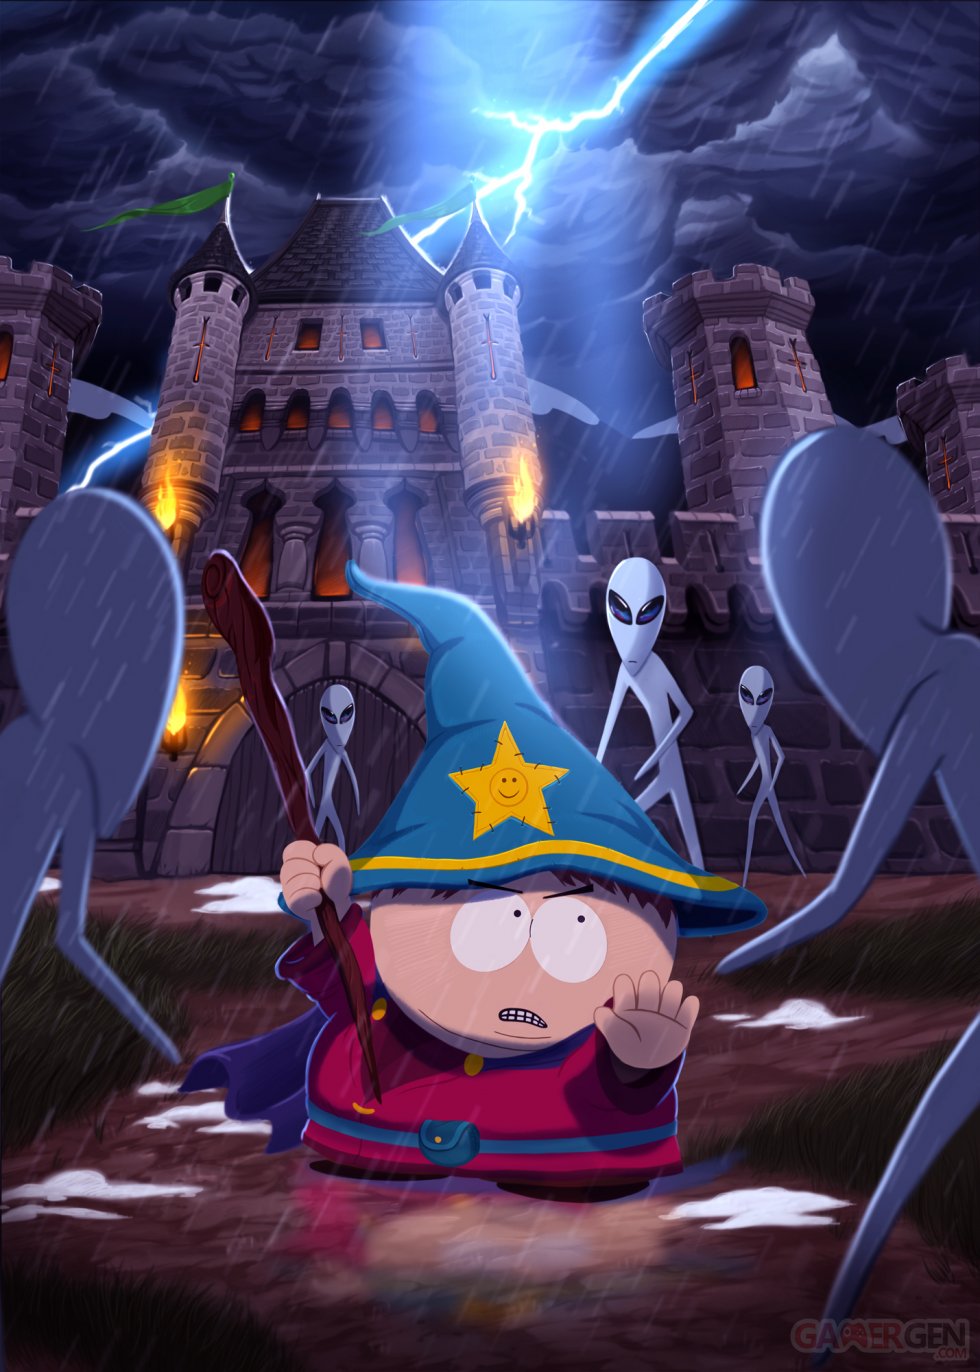 South-Park-The-Stick-of-Truth_15-02-2014_art-2